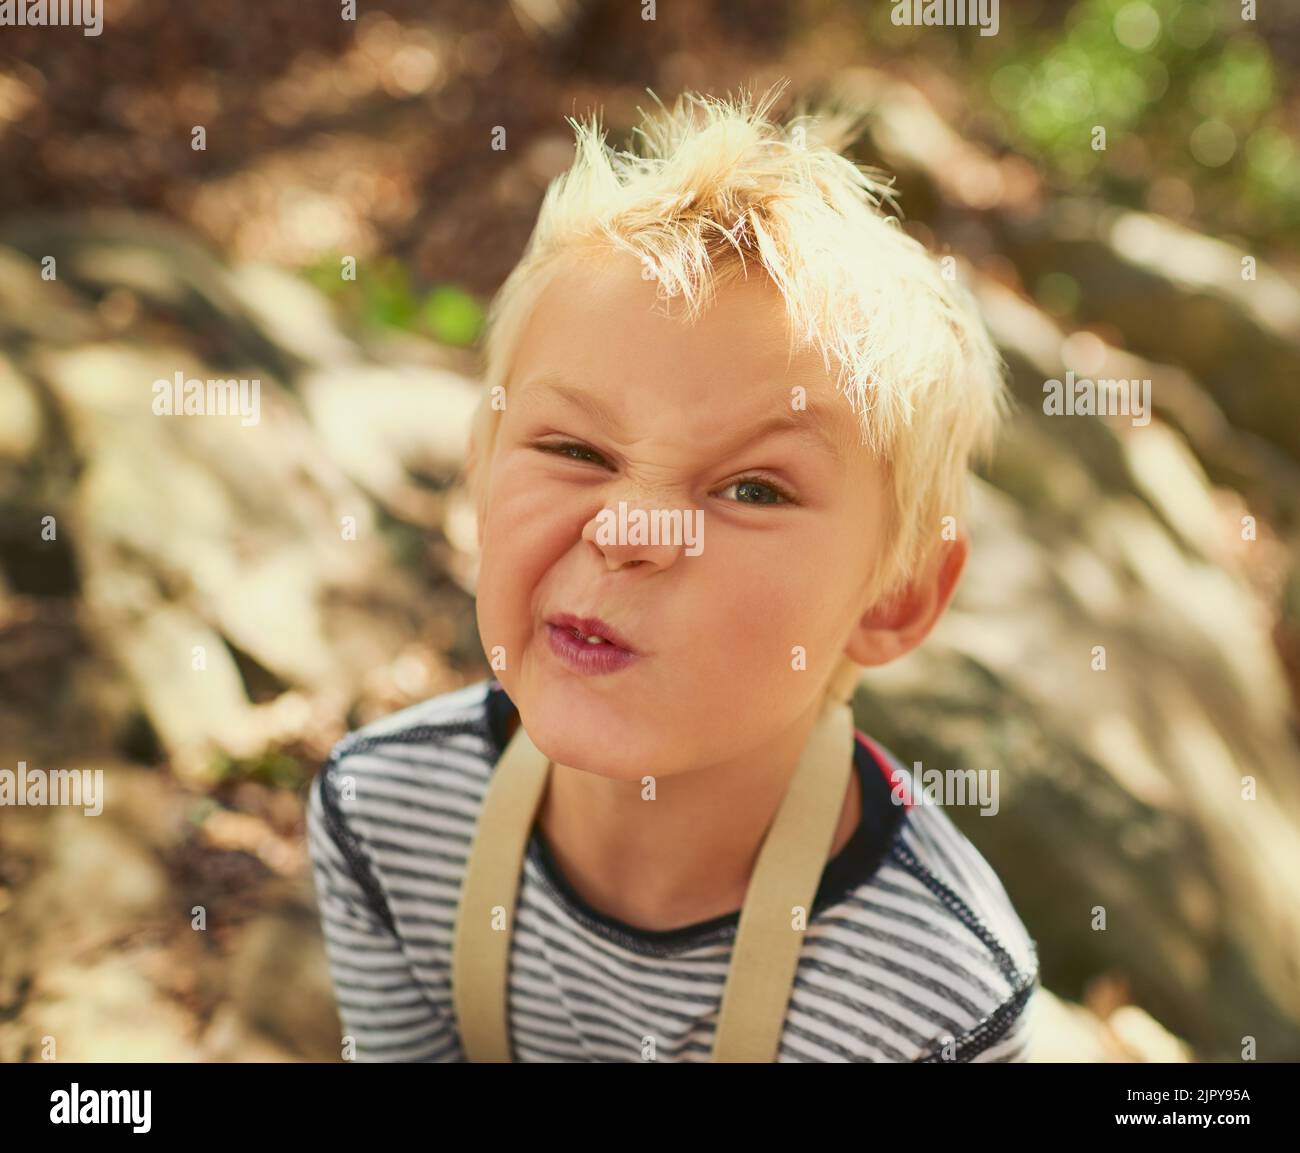 Whats the funniest face you can pull. Portrait of an adorable little boy playing outdoors. Stock Photo